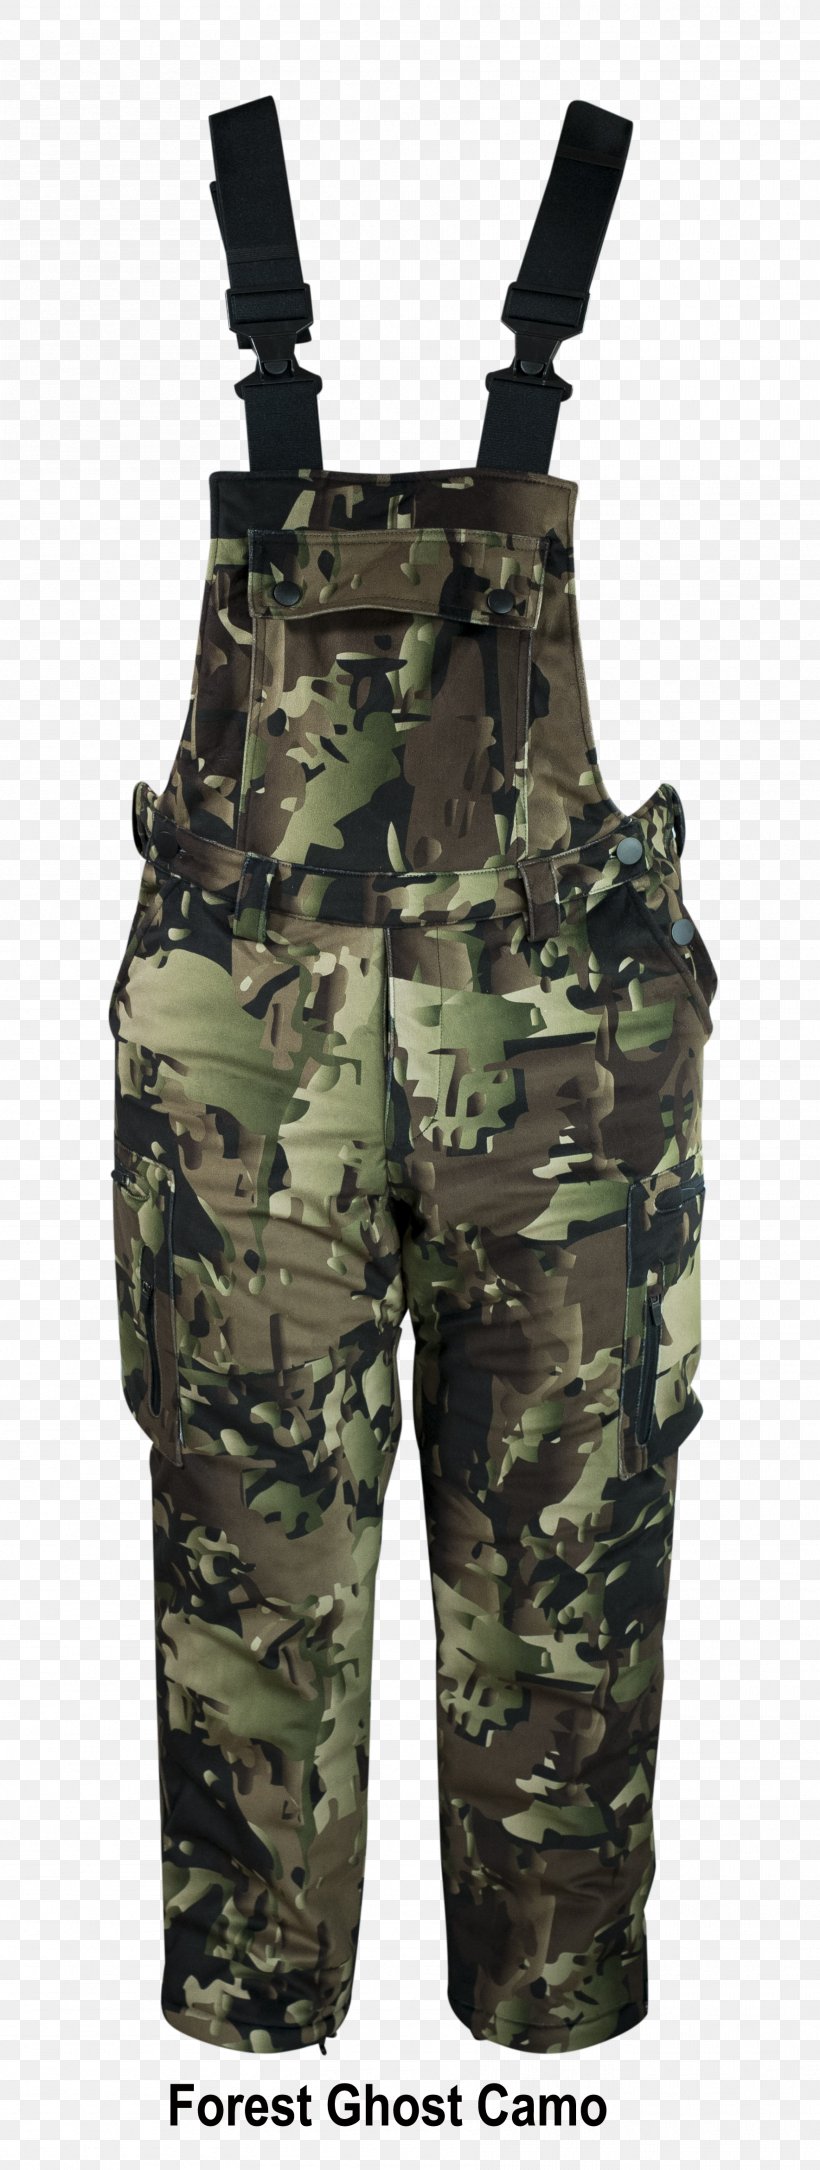 Military Uniform Military Camouflage Pocket Pants, PNG, 1768x4680px, Military Uniform, Military, Military Camouflage, Overall, Pants Download Free